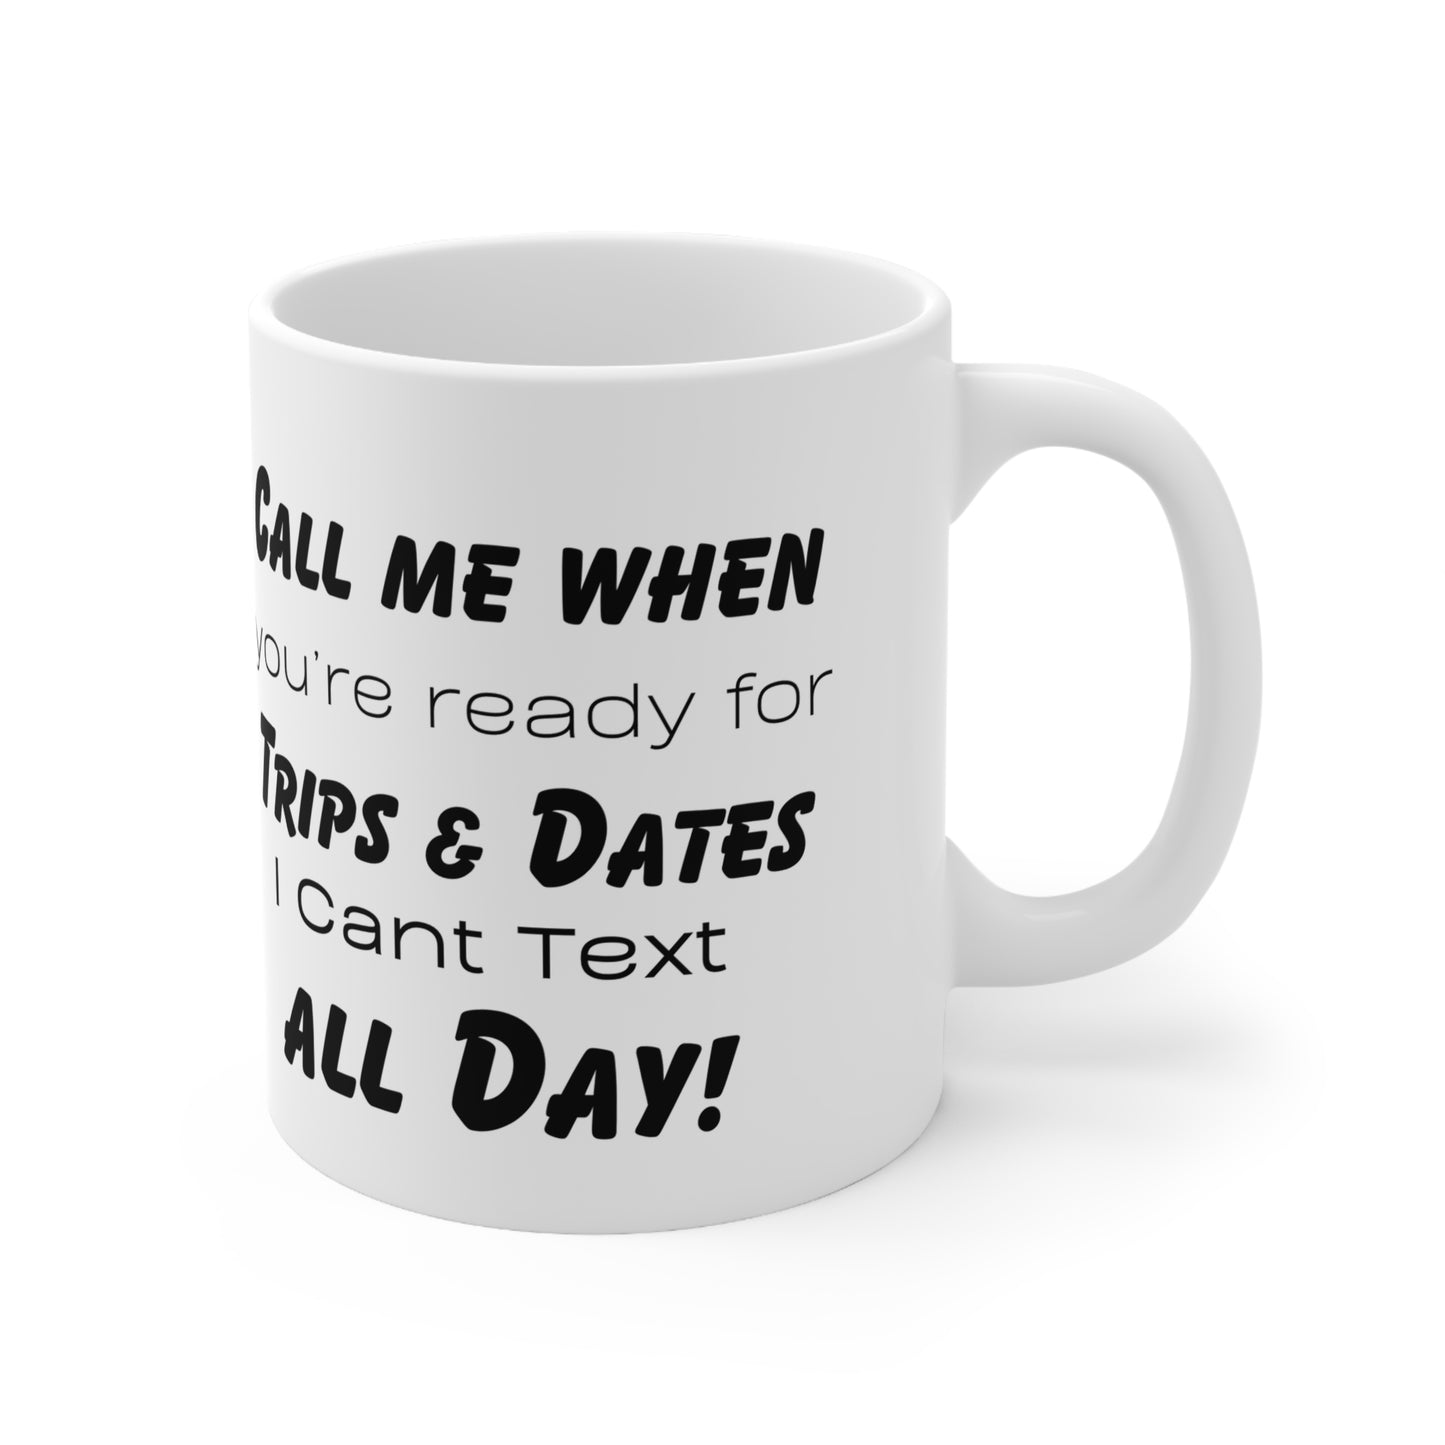 Call me when you're ready for trip & dates. I can't text all day! Ceramic Coffee Cups, 11oz, 15oz